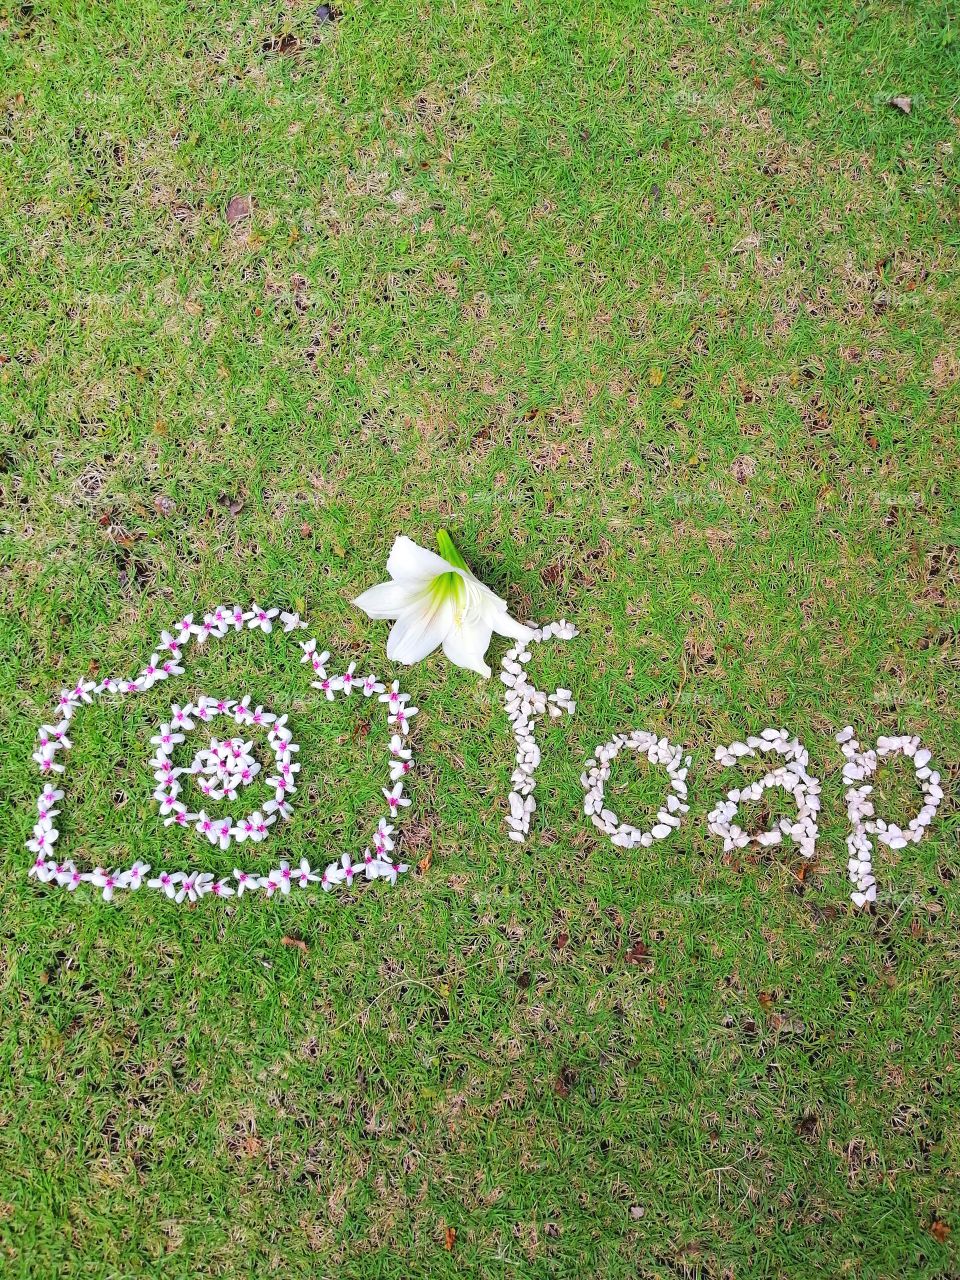 Foap logo formed using flowers and Foap word formed with decorative rocks on a green grass background and with white Amaryllis flower.